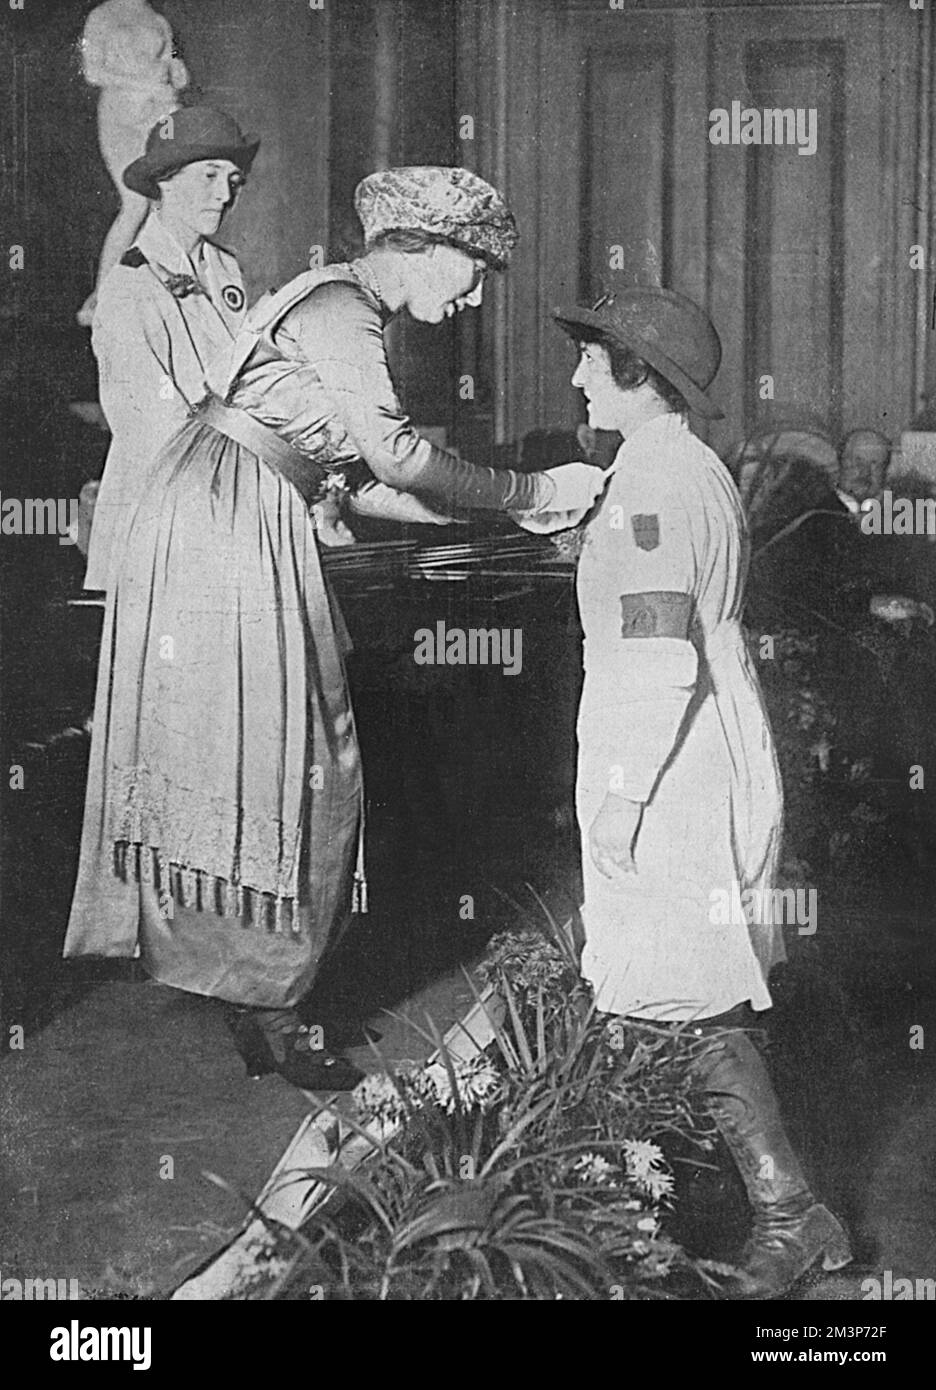 Princess Mary presenting medals to Land Girls in December 1919 at the Draper's Hall, at their last rally before demobilisation.  Fifty five women were awarded Distinguished Service Bars for deeds of bravery whilst in charge of horses, cattles and the like.  Pictured is Miss Ascanio being decorated by the Princess.      Date: 1919 Stock Photo